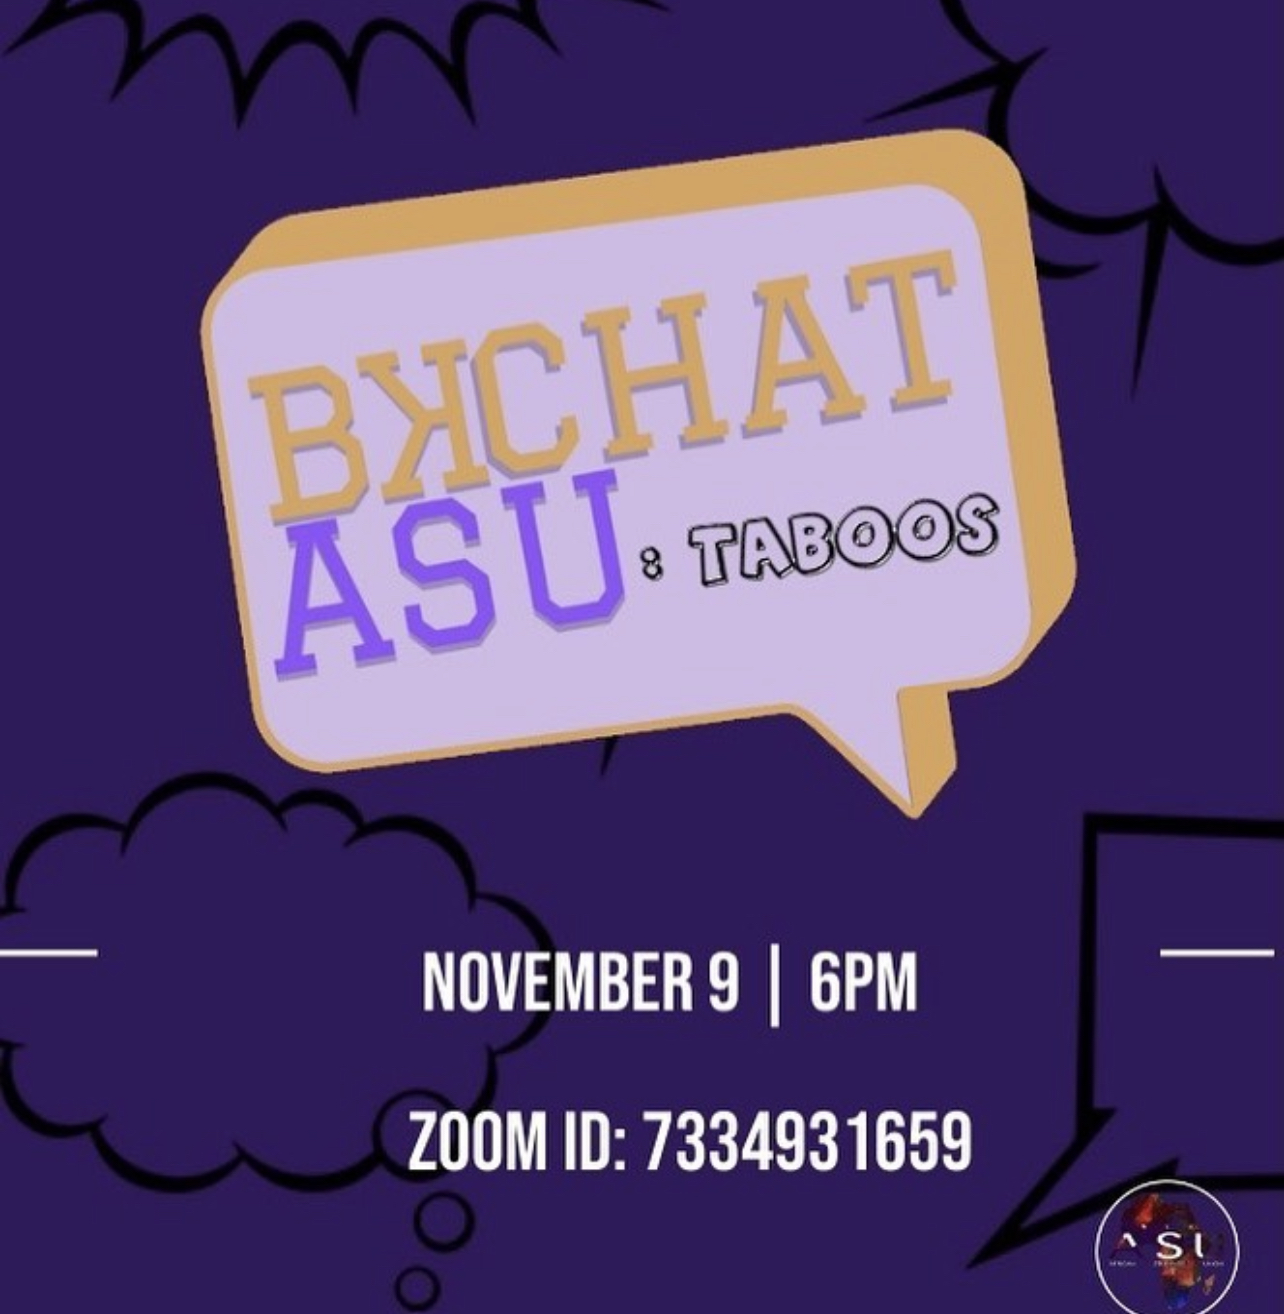 A marketing poster for a BKChat ASU Taboos event.